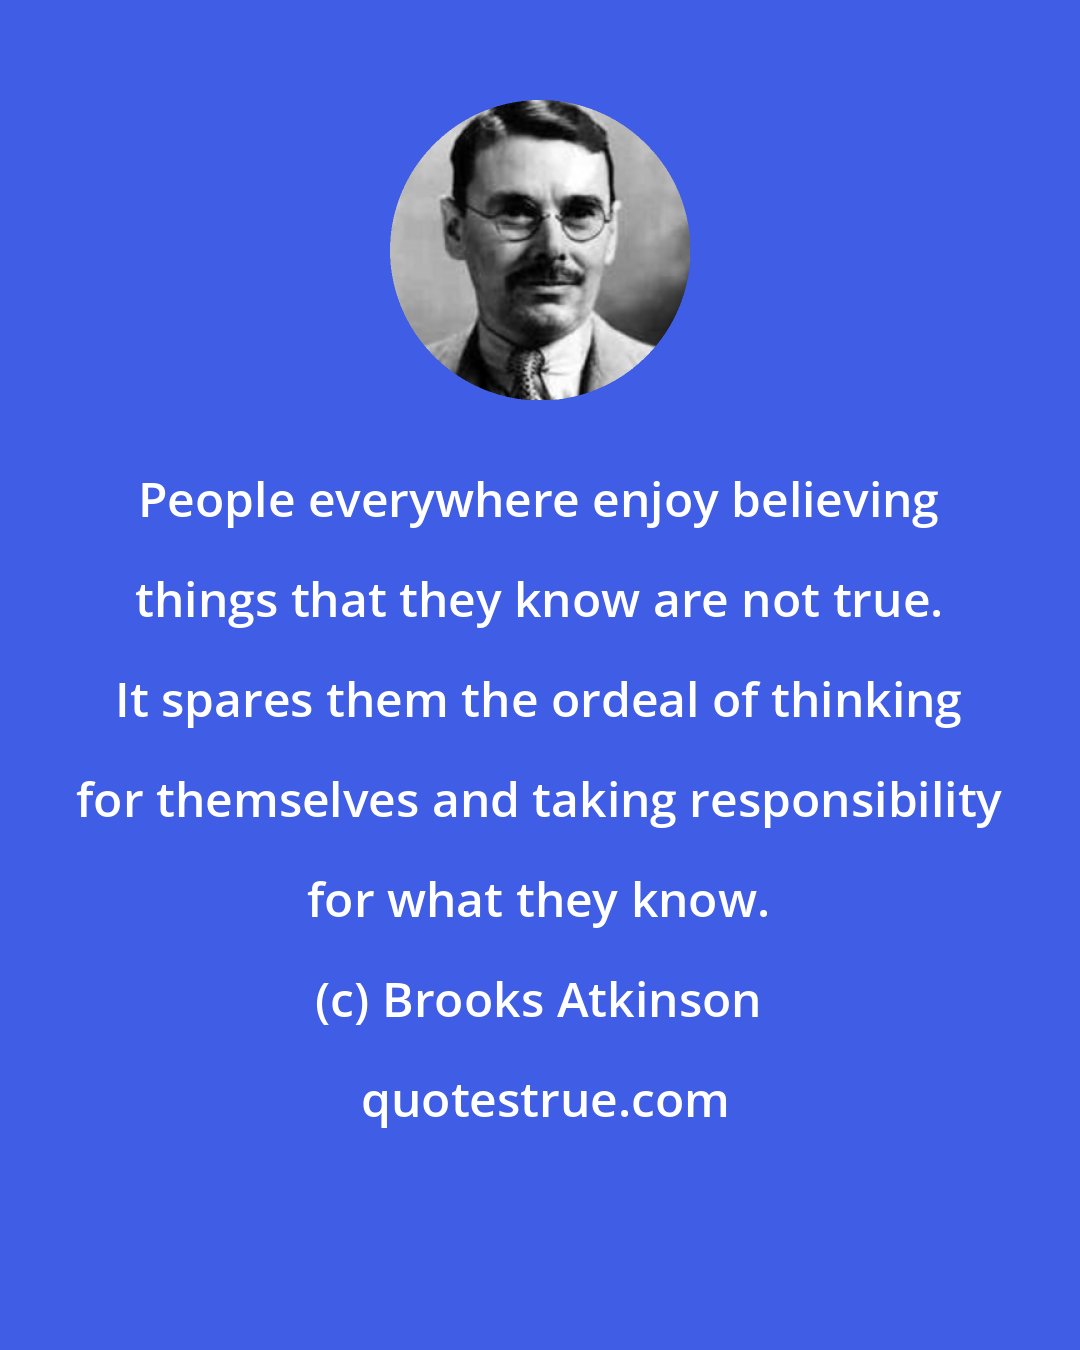 Brooks Atkinson: People everywhere enjoy believing things that they know are not true. It spares them the ordeal of thinking for themselves and taking responsibility for what they know.